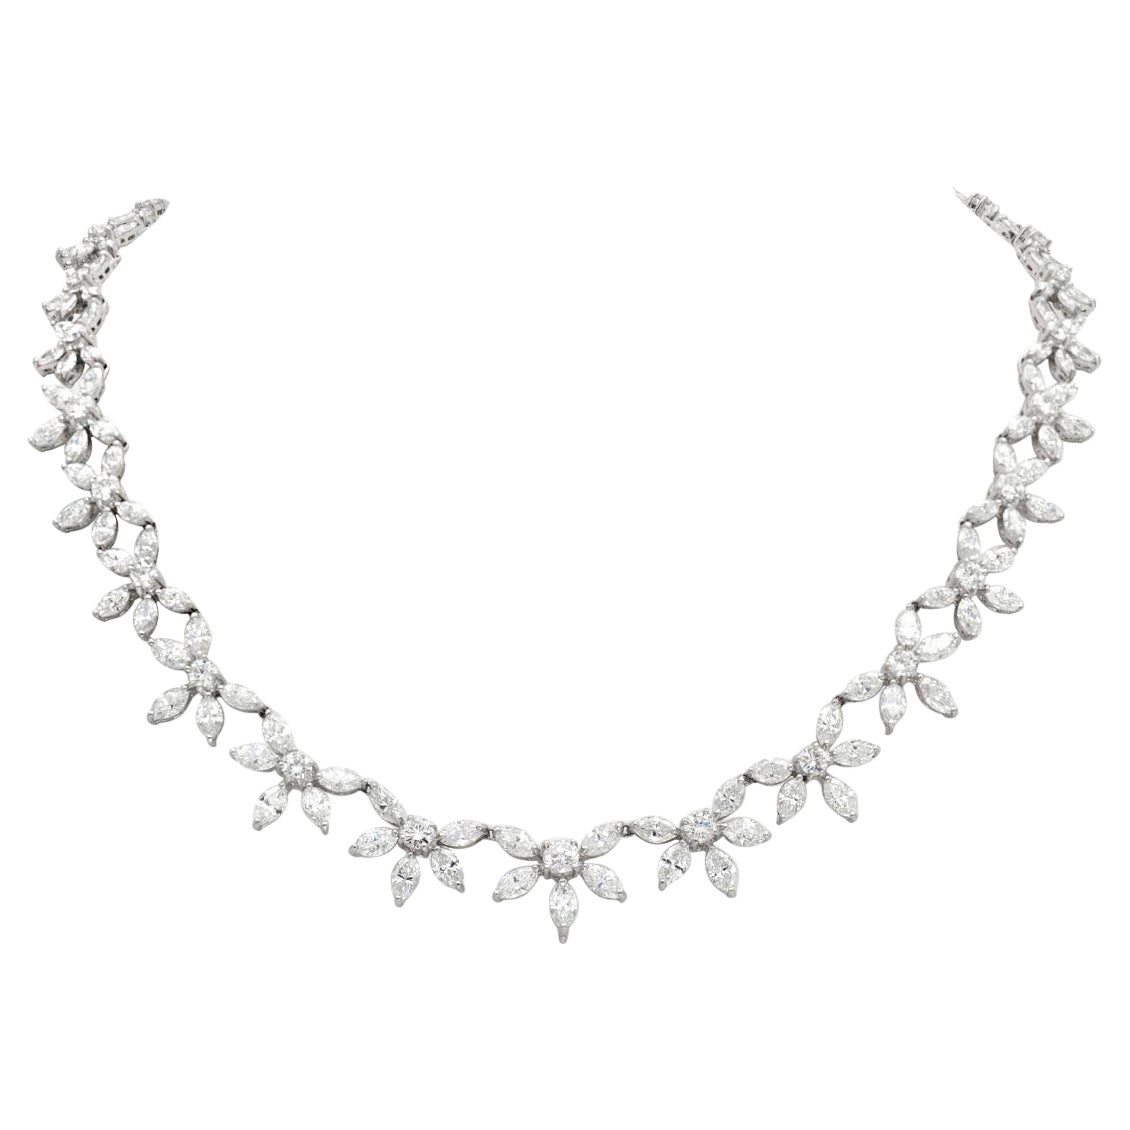 1950s 35.10 Carat Round and Marquise Cut Diamond Necklace For Sale